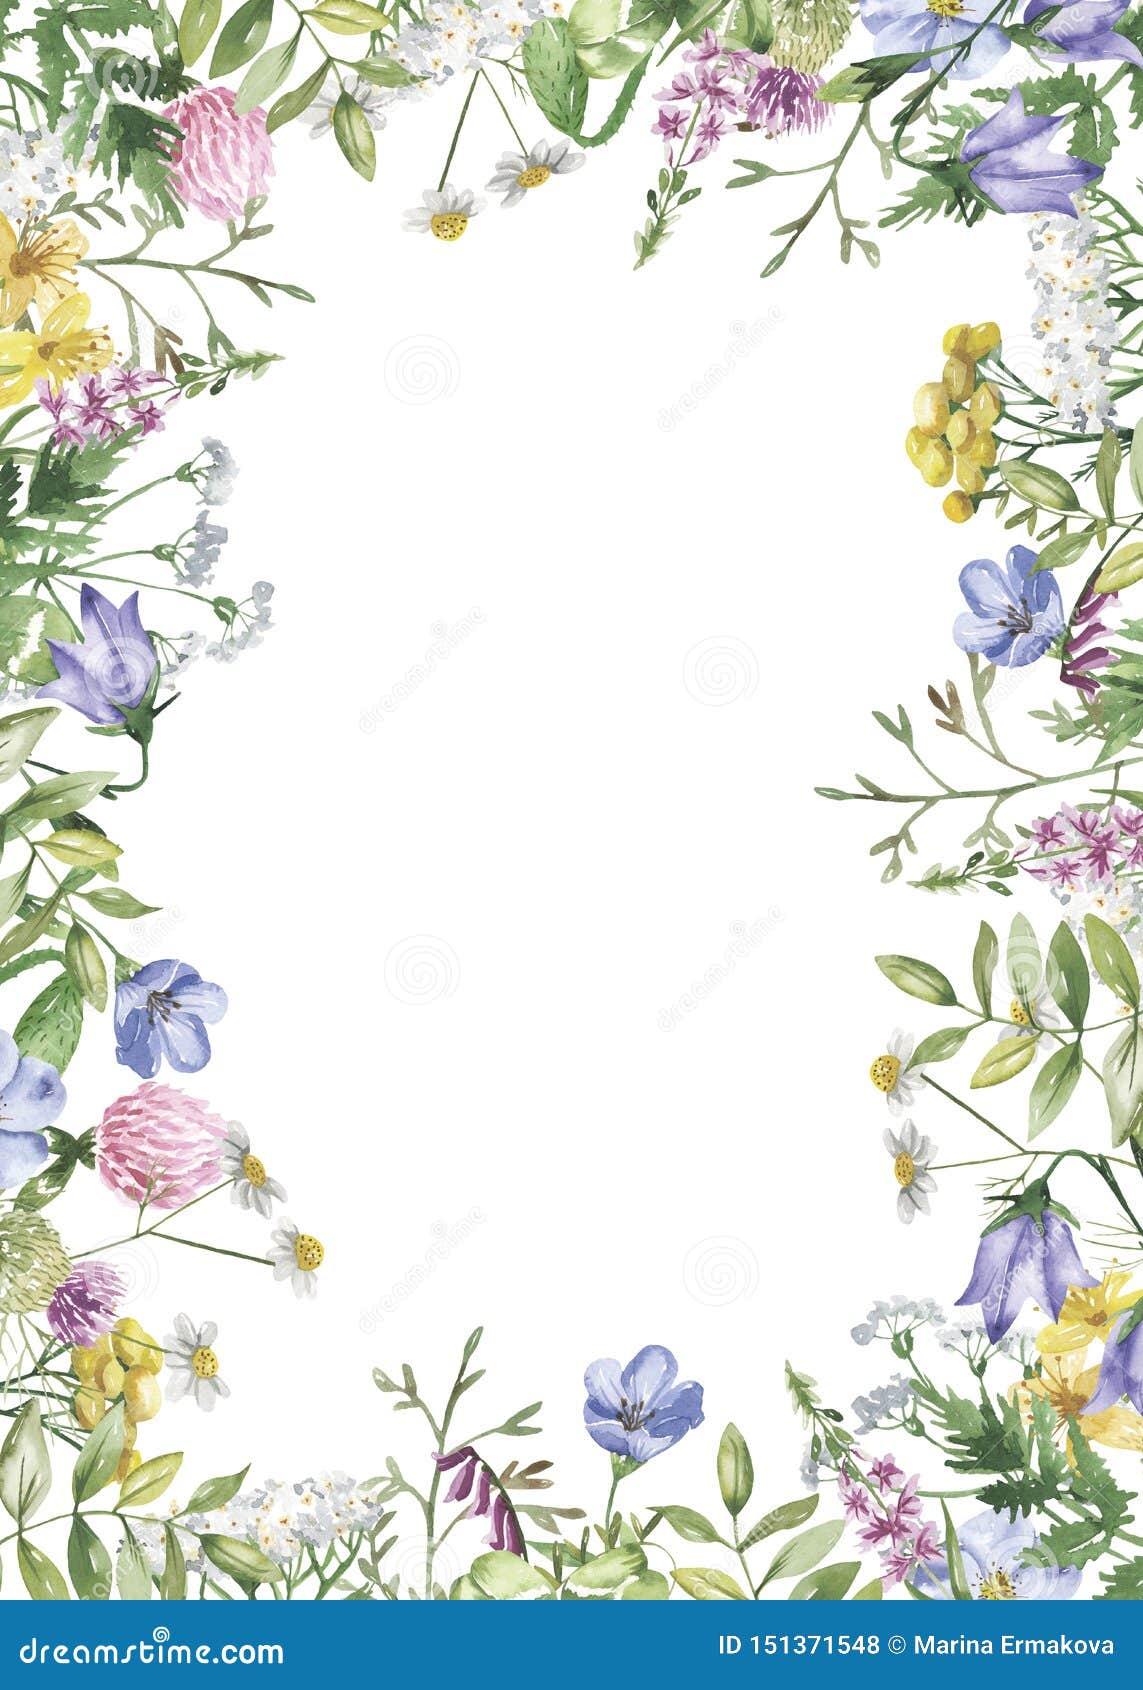 rectangular frame with watercolor wildflowers, golden splashes, watercolor stains.